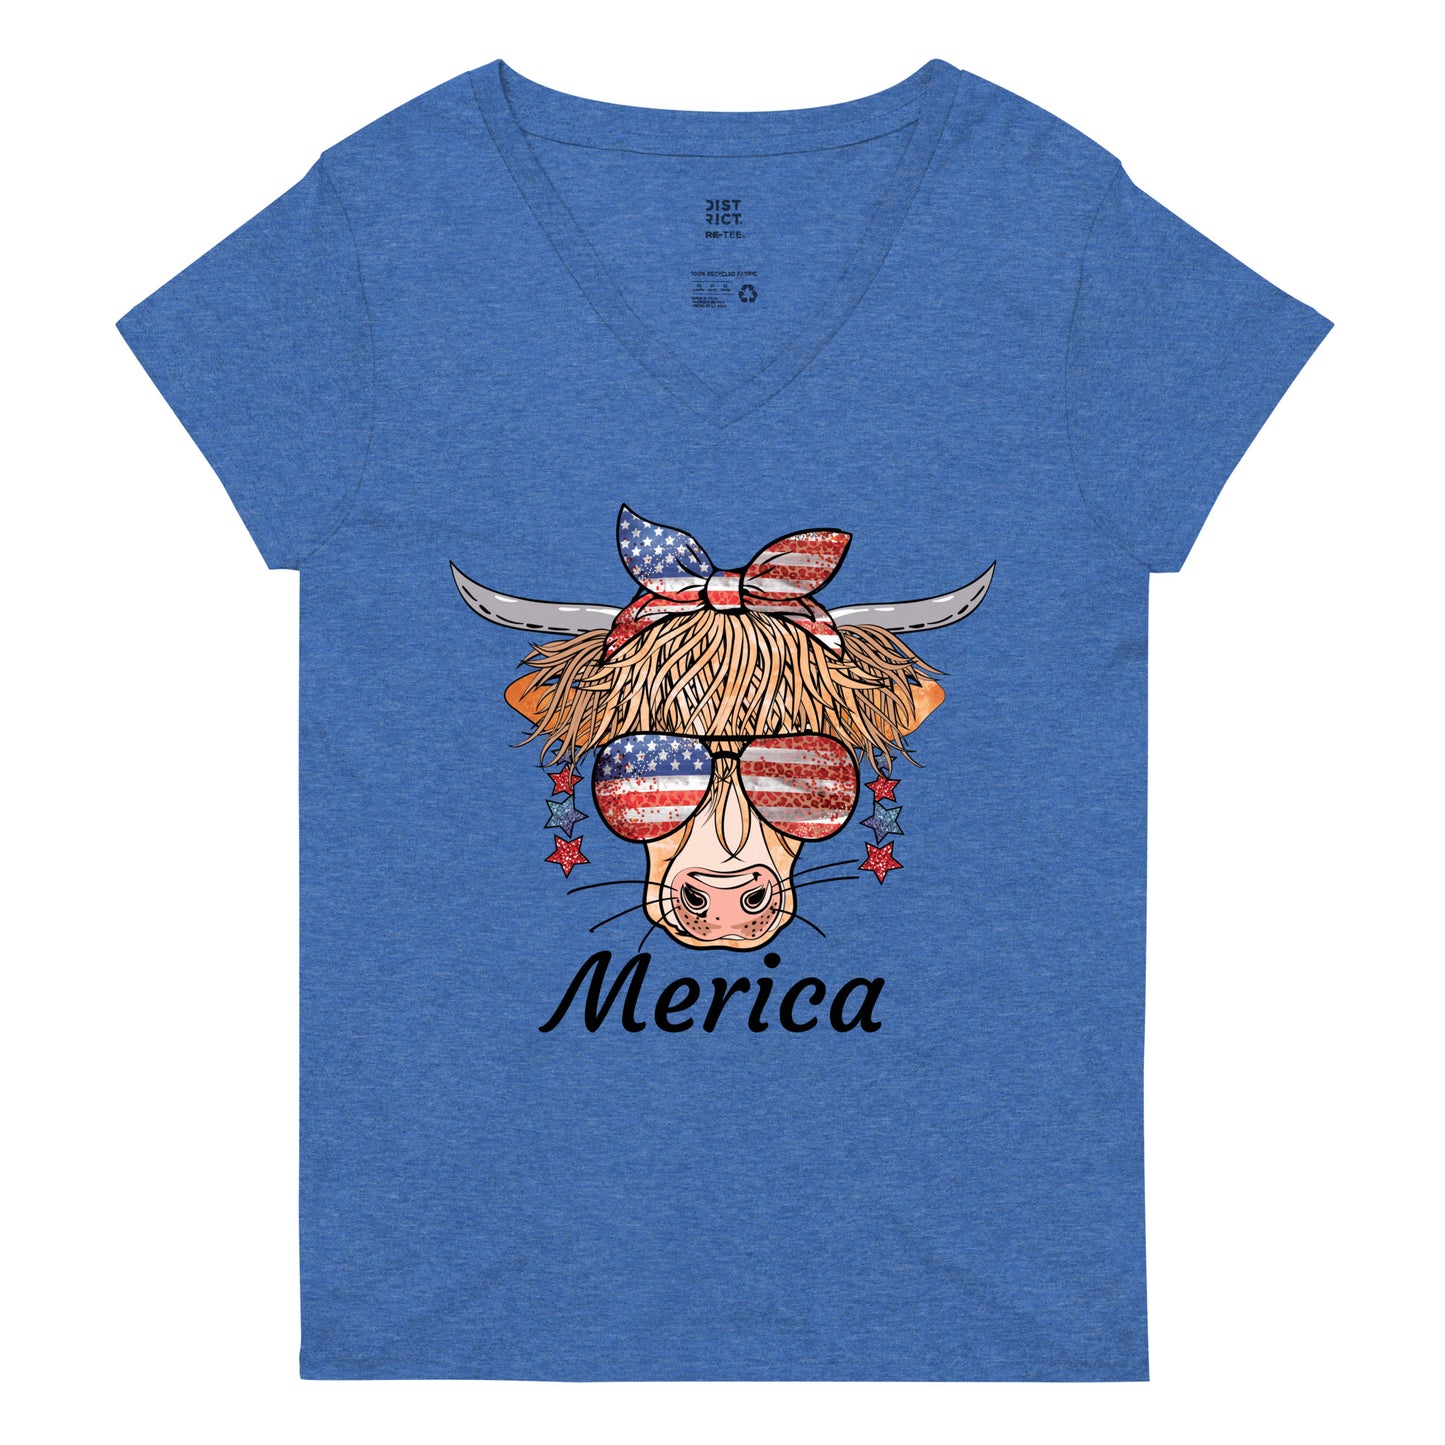 Merica Cow recycled v-neck t-shirt - Blue Heather / S - Sport Finesse